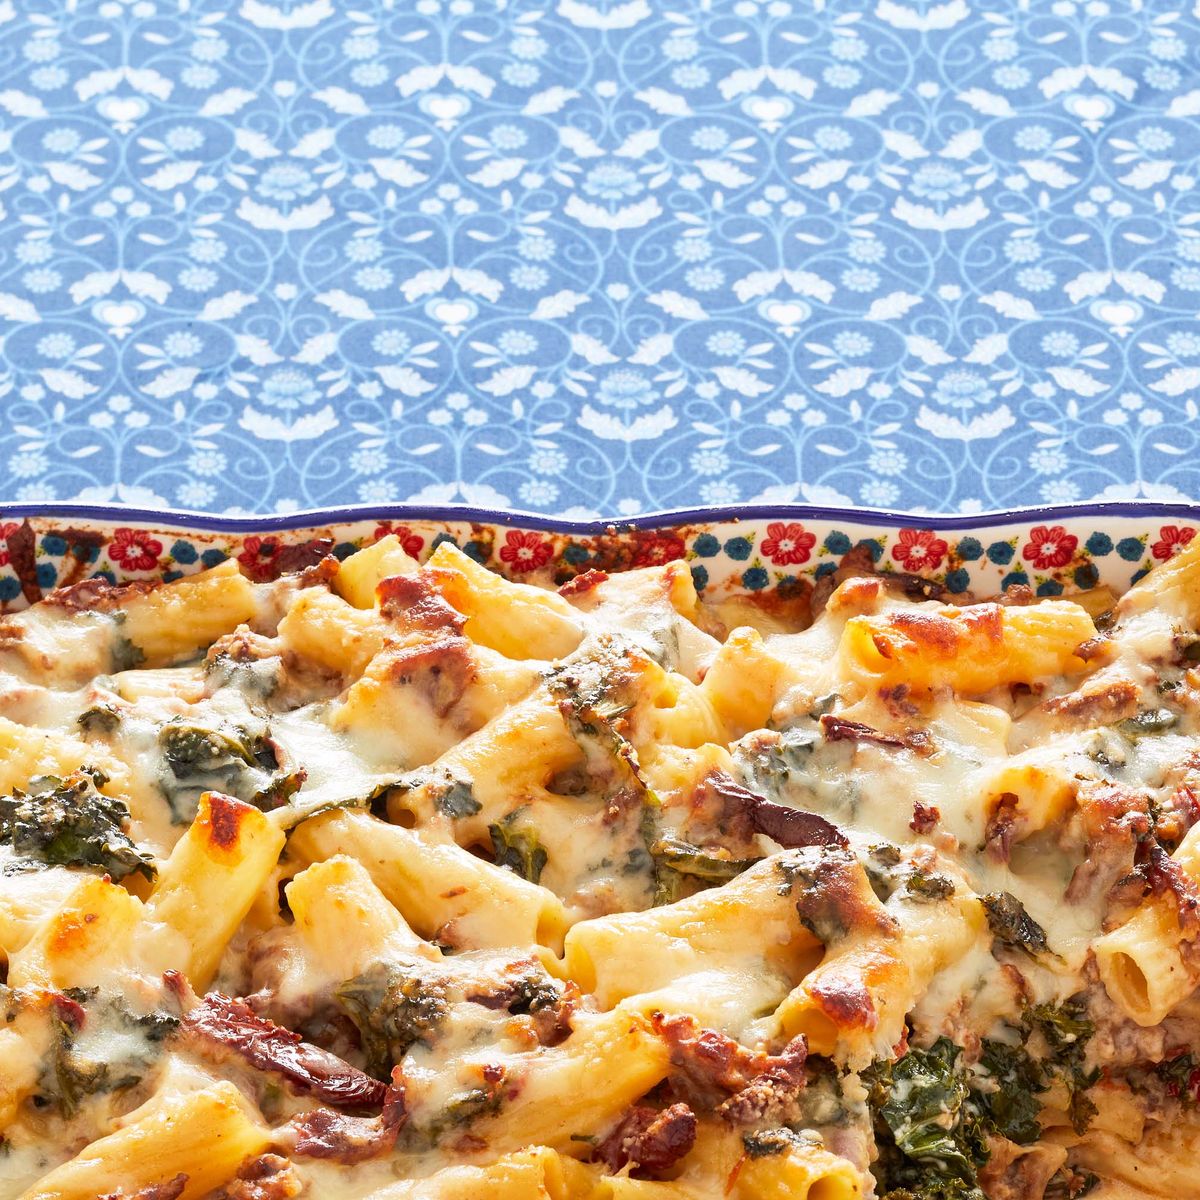 the pioneer woman's baked pasta with sausage recipe